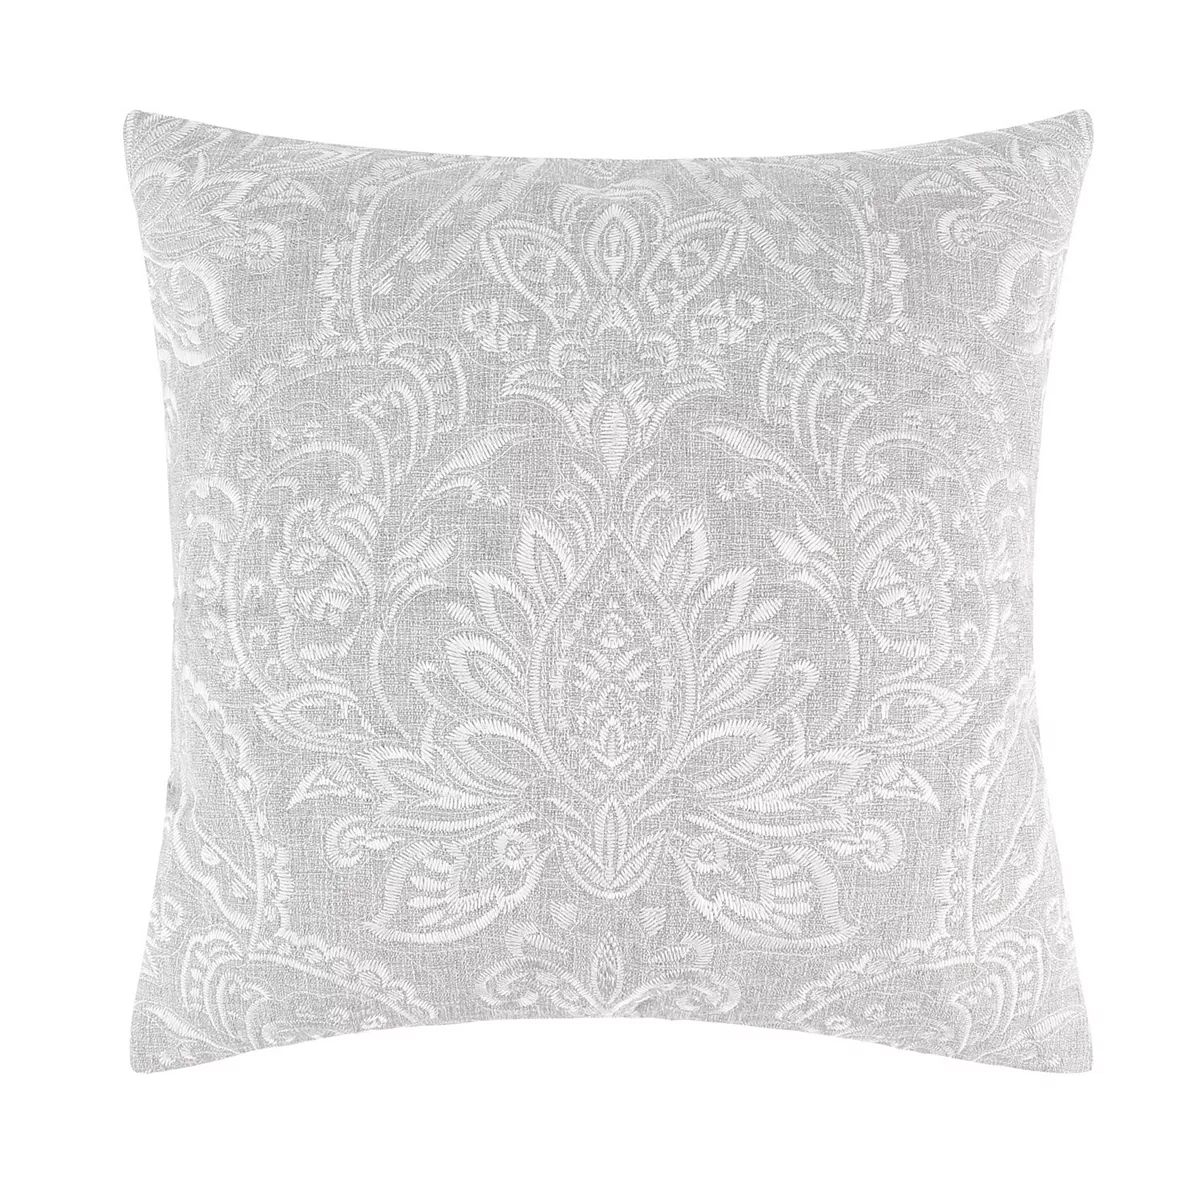 Levtex Home Sherbourne Embroidered Floral Throw Pillow | Kohl's